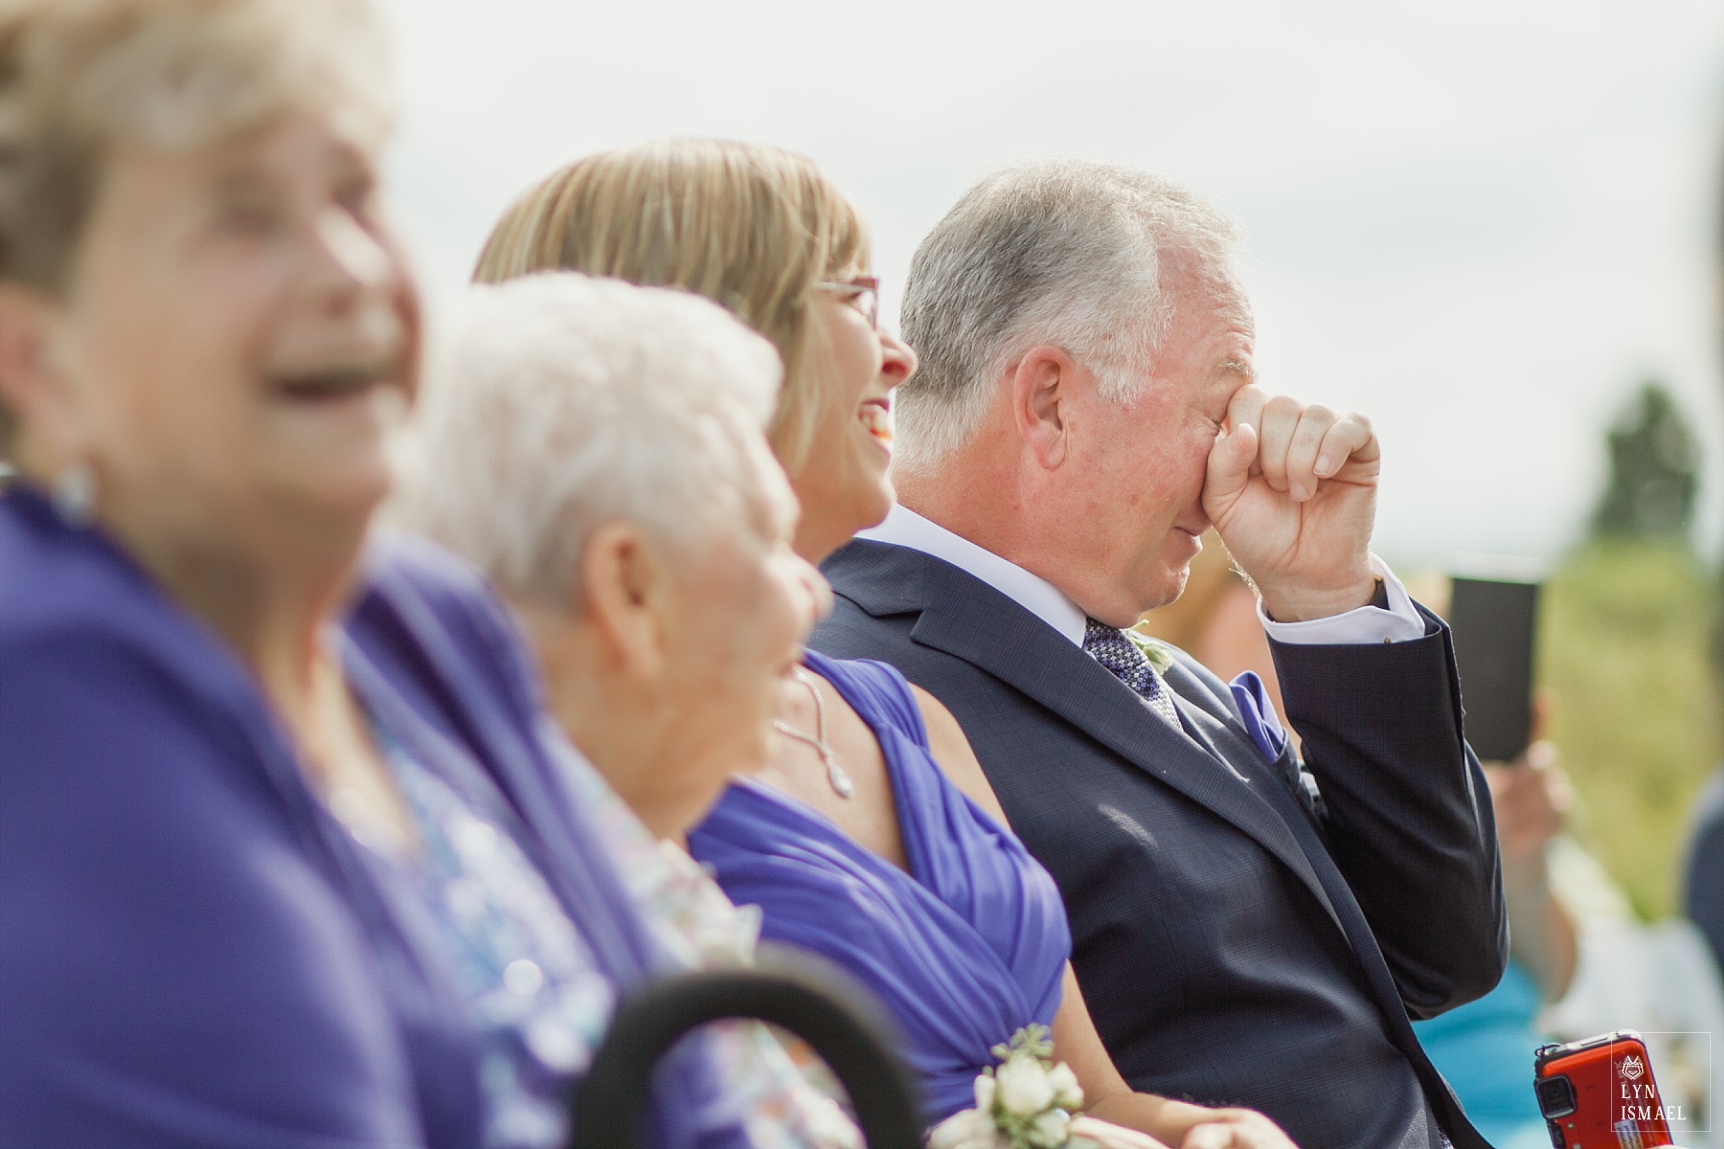 Groom's father wipes his tears away